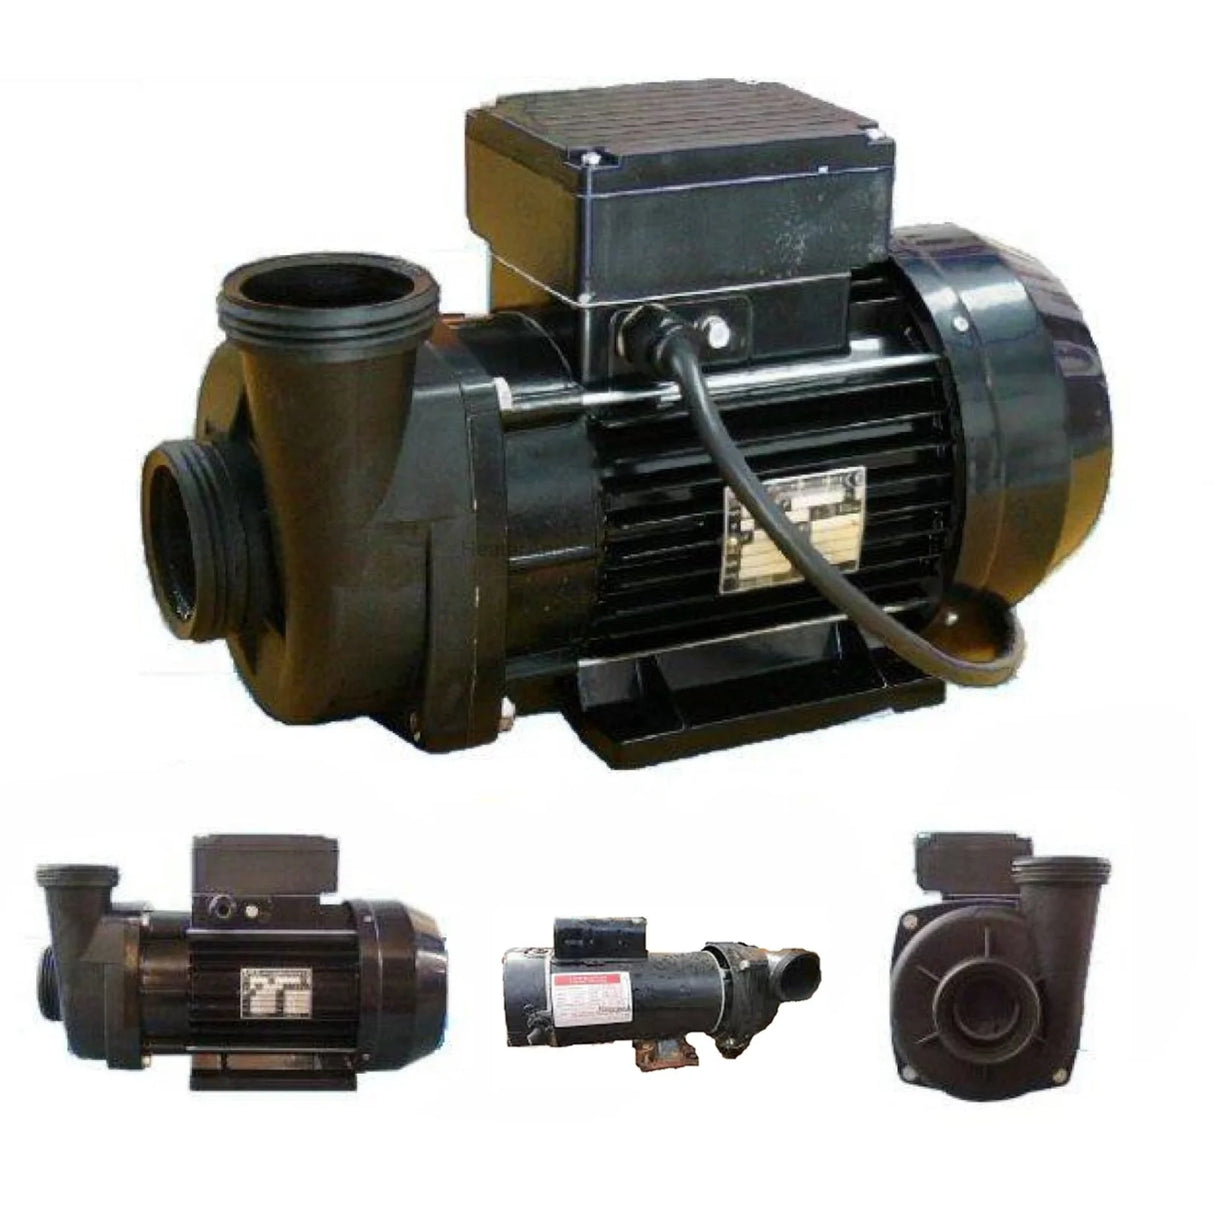 2.0HP - 1-Speed - SpaQuip MaxiFlow Spa Pumps - Q6883 / A7134075 - Heater and Spa Parts